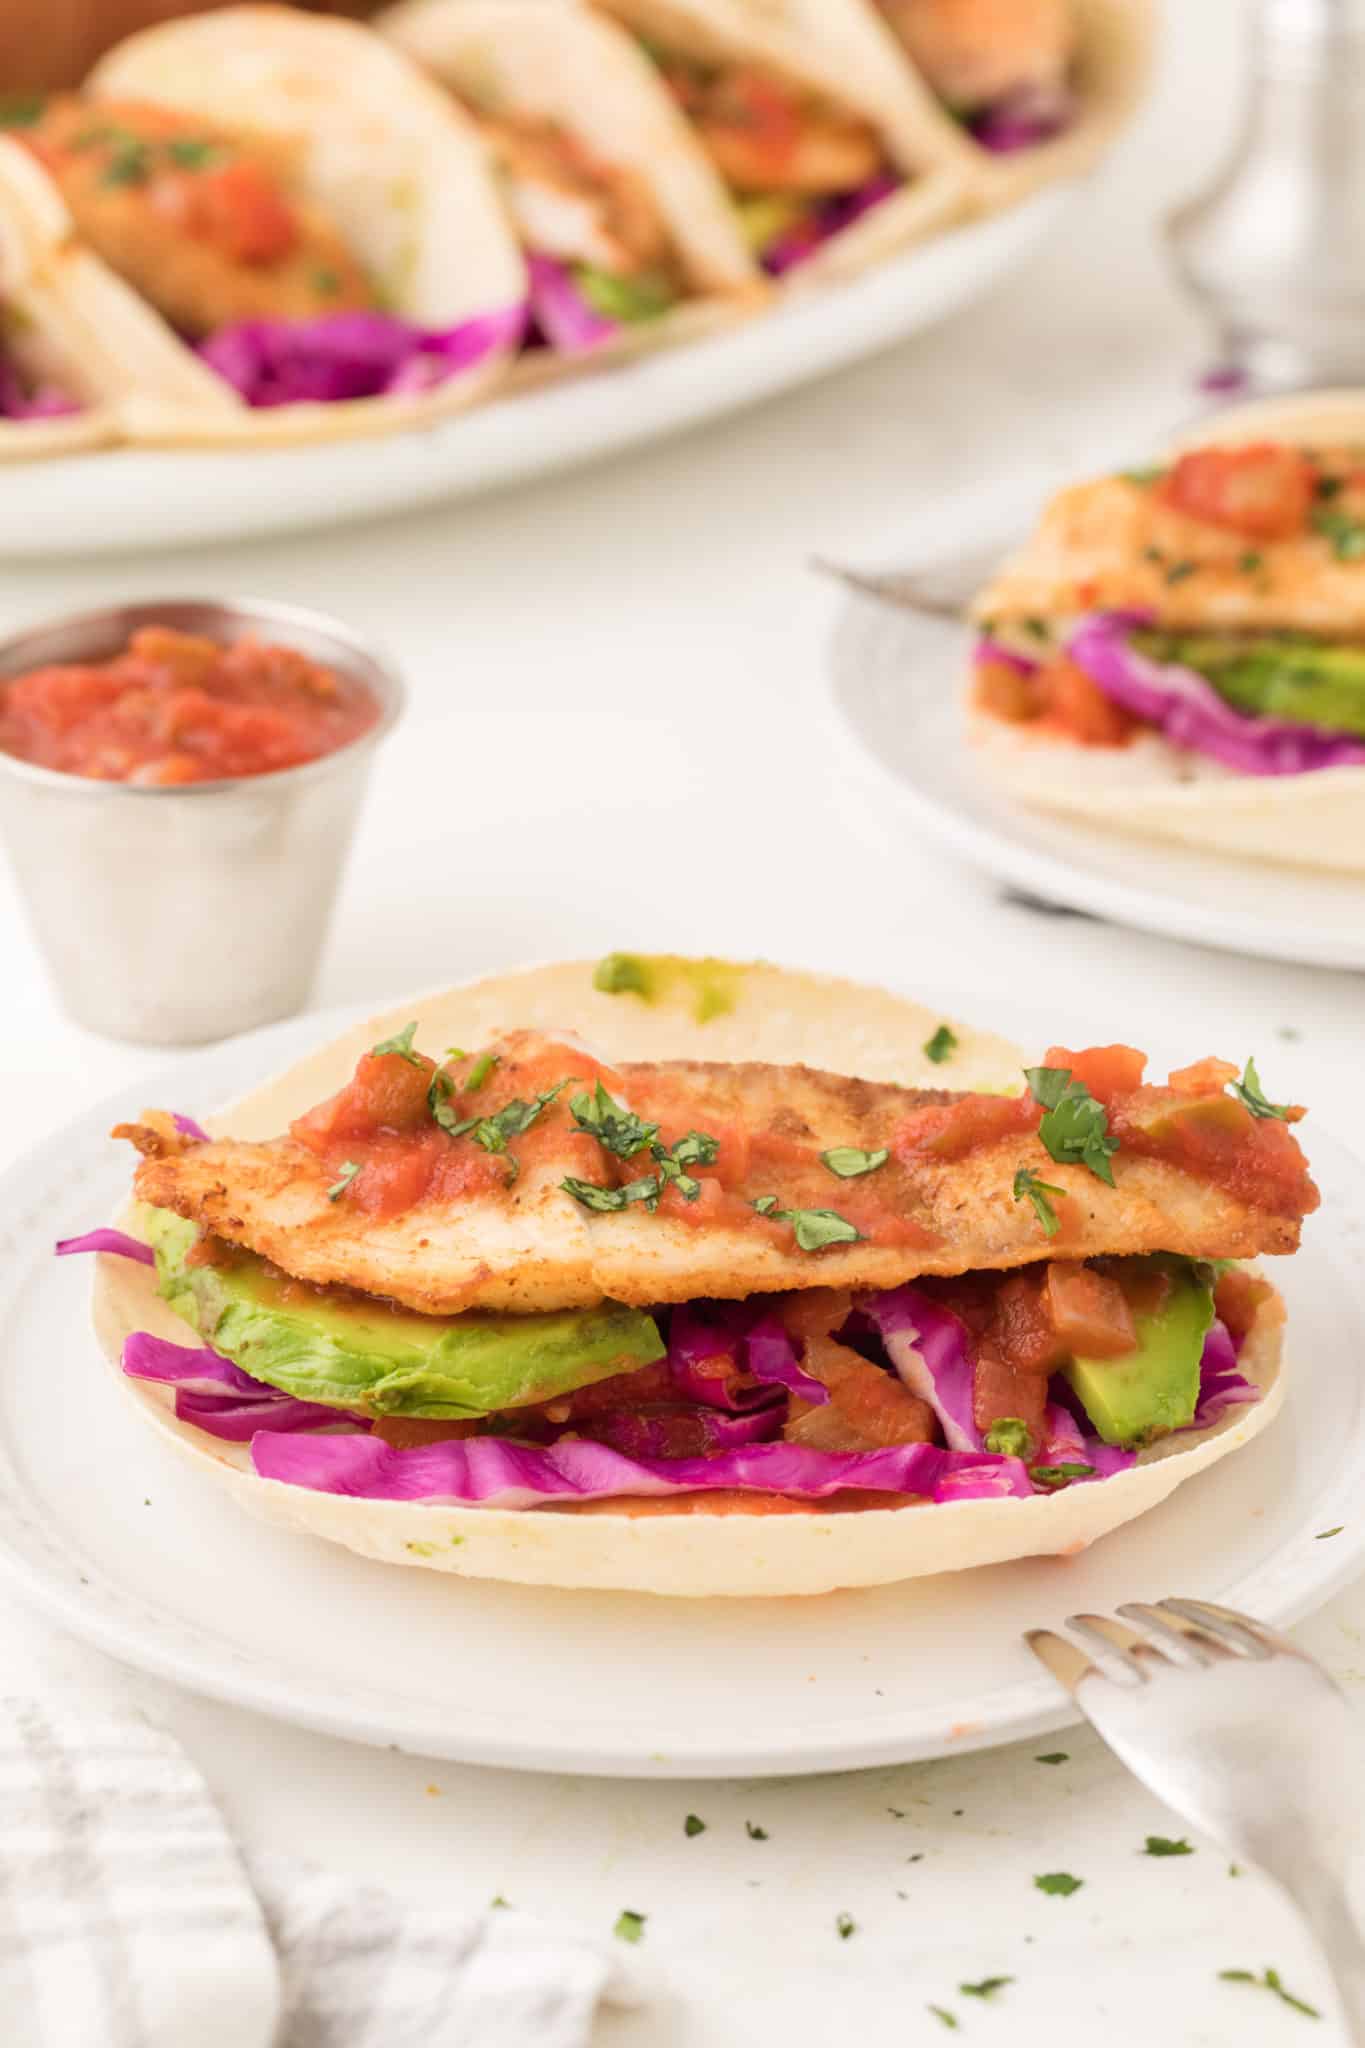 A fish taco with salsa and avocado.